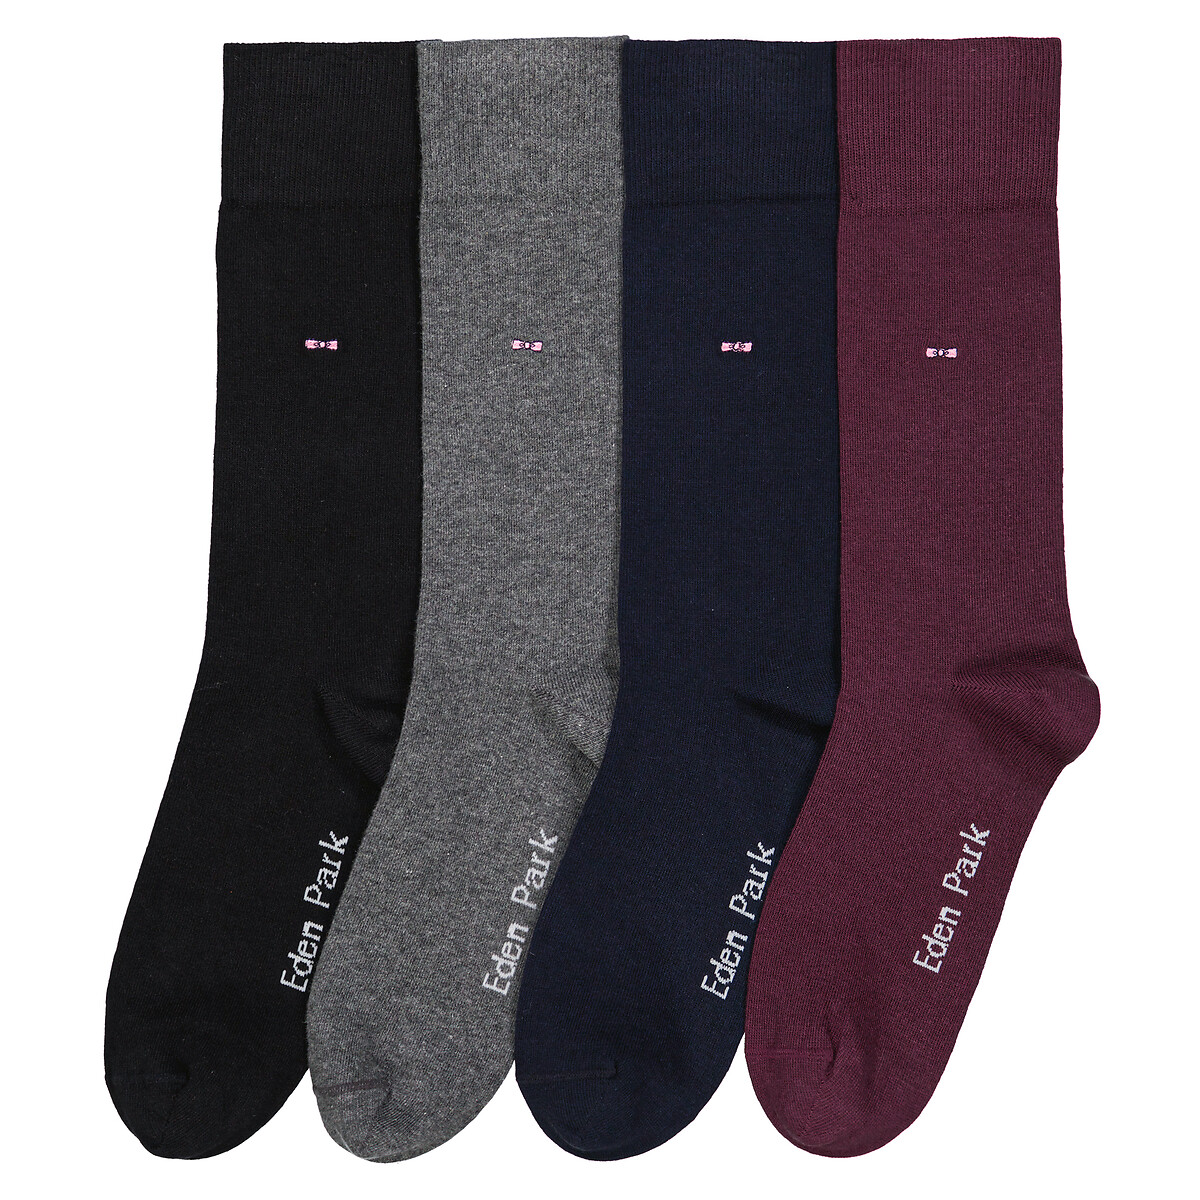 Pack of 4 Pairs of Crew Socks in Cotton Mix